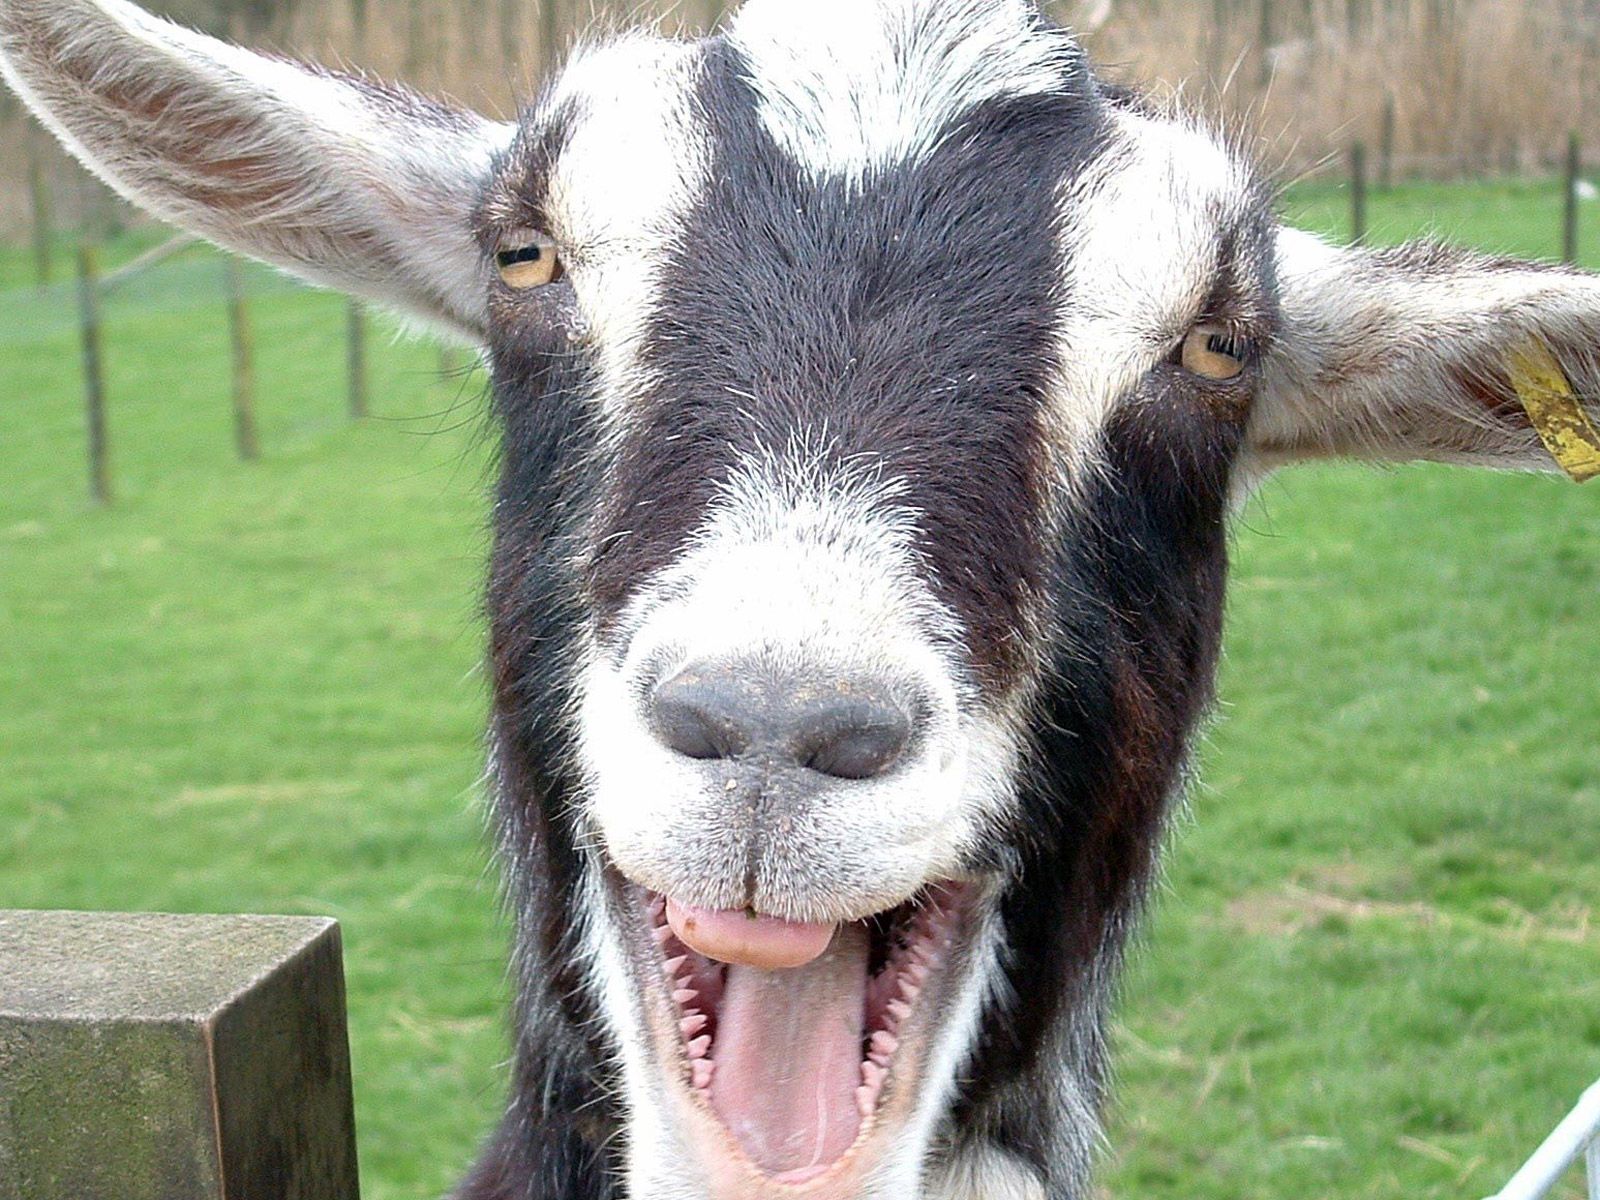 Free hd funny wallpapers for desktop background free hd desktop wallpapers funny goat pictures goats funny cute goats